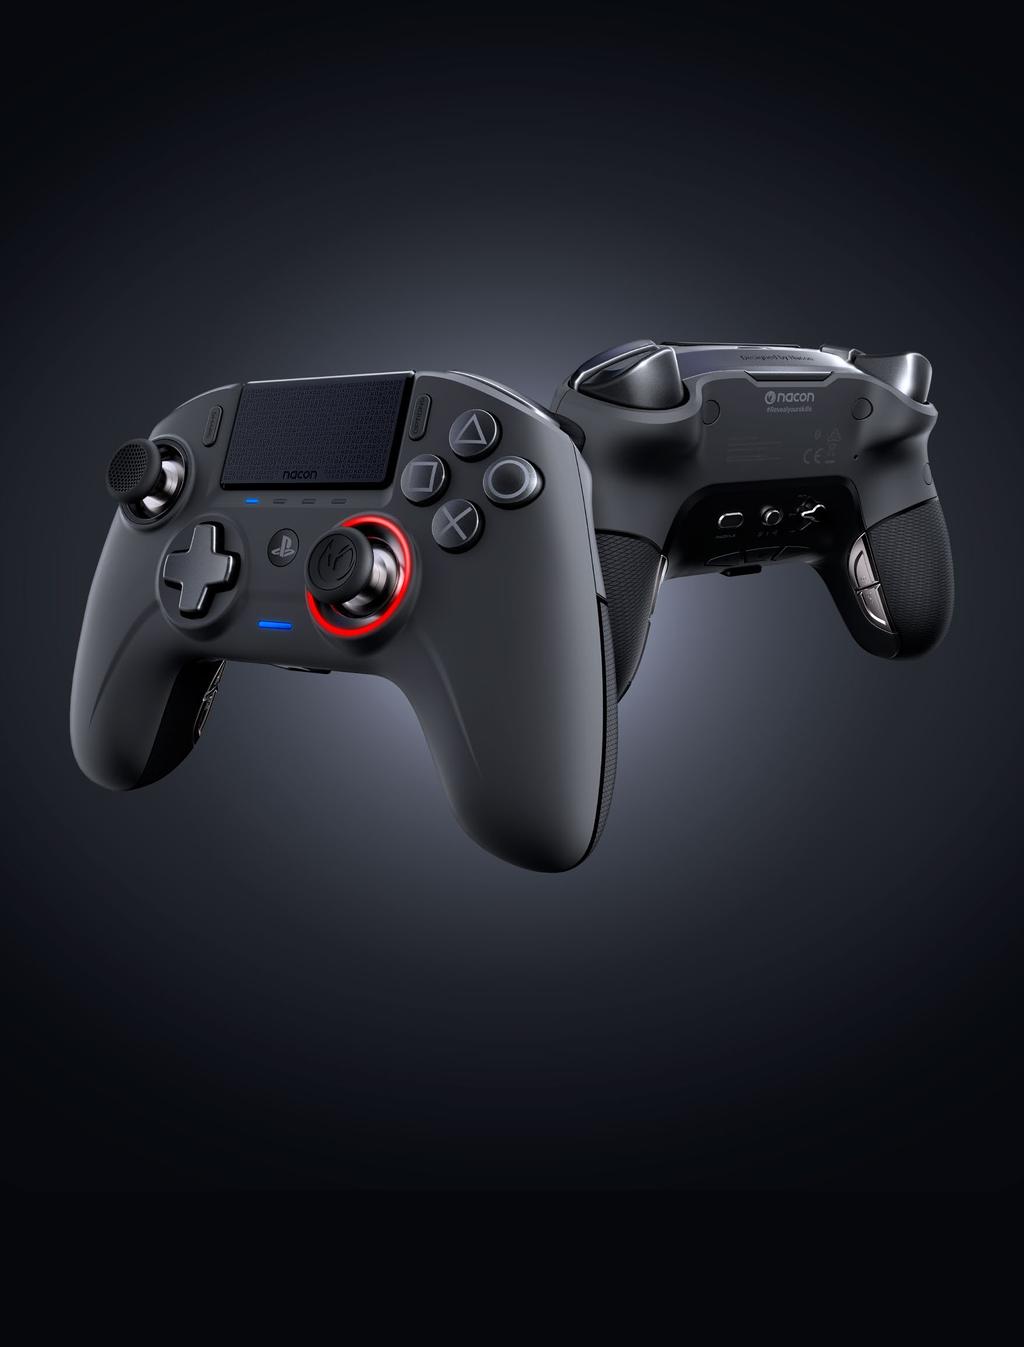 REVOLUTION UNLIMITED Pro Controller is a product distributed by